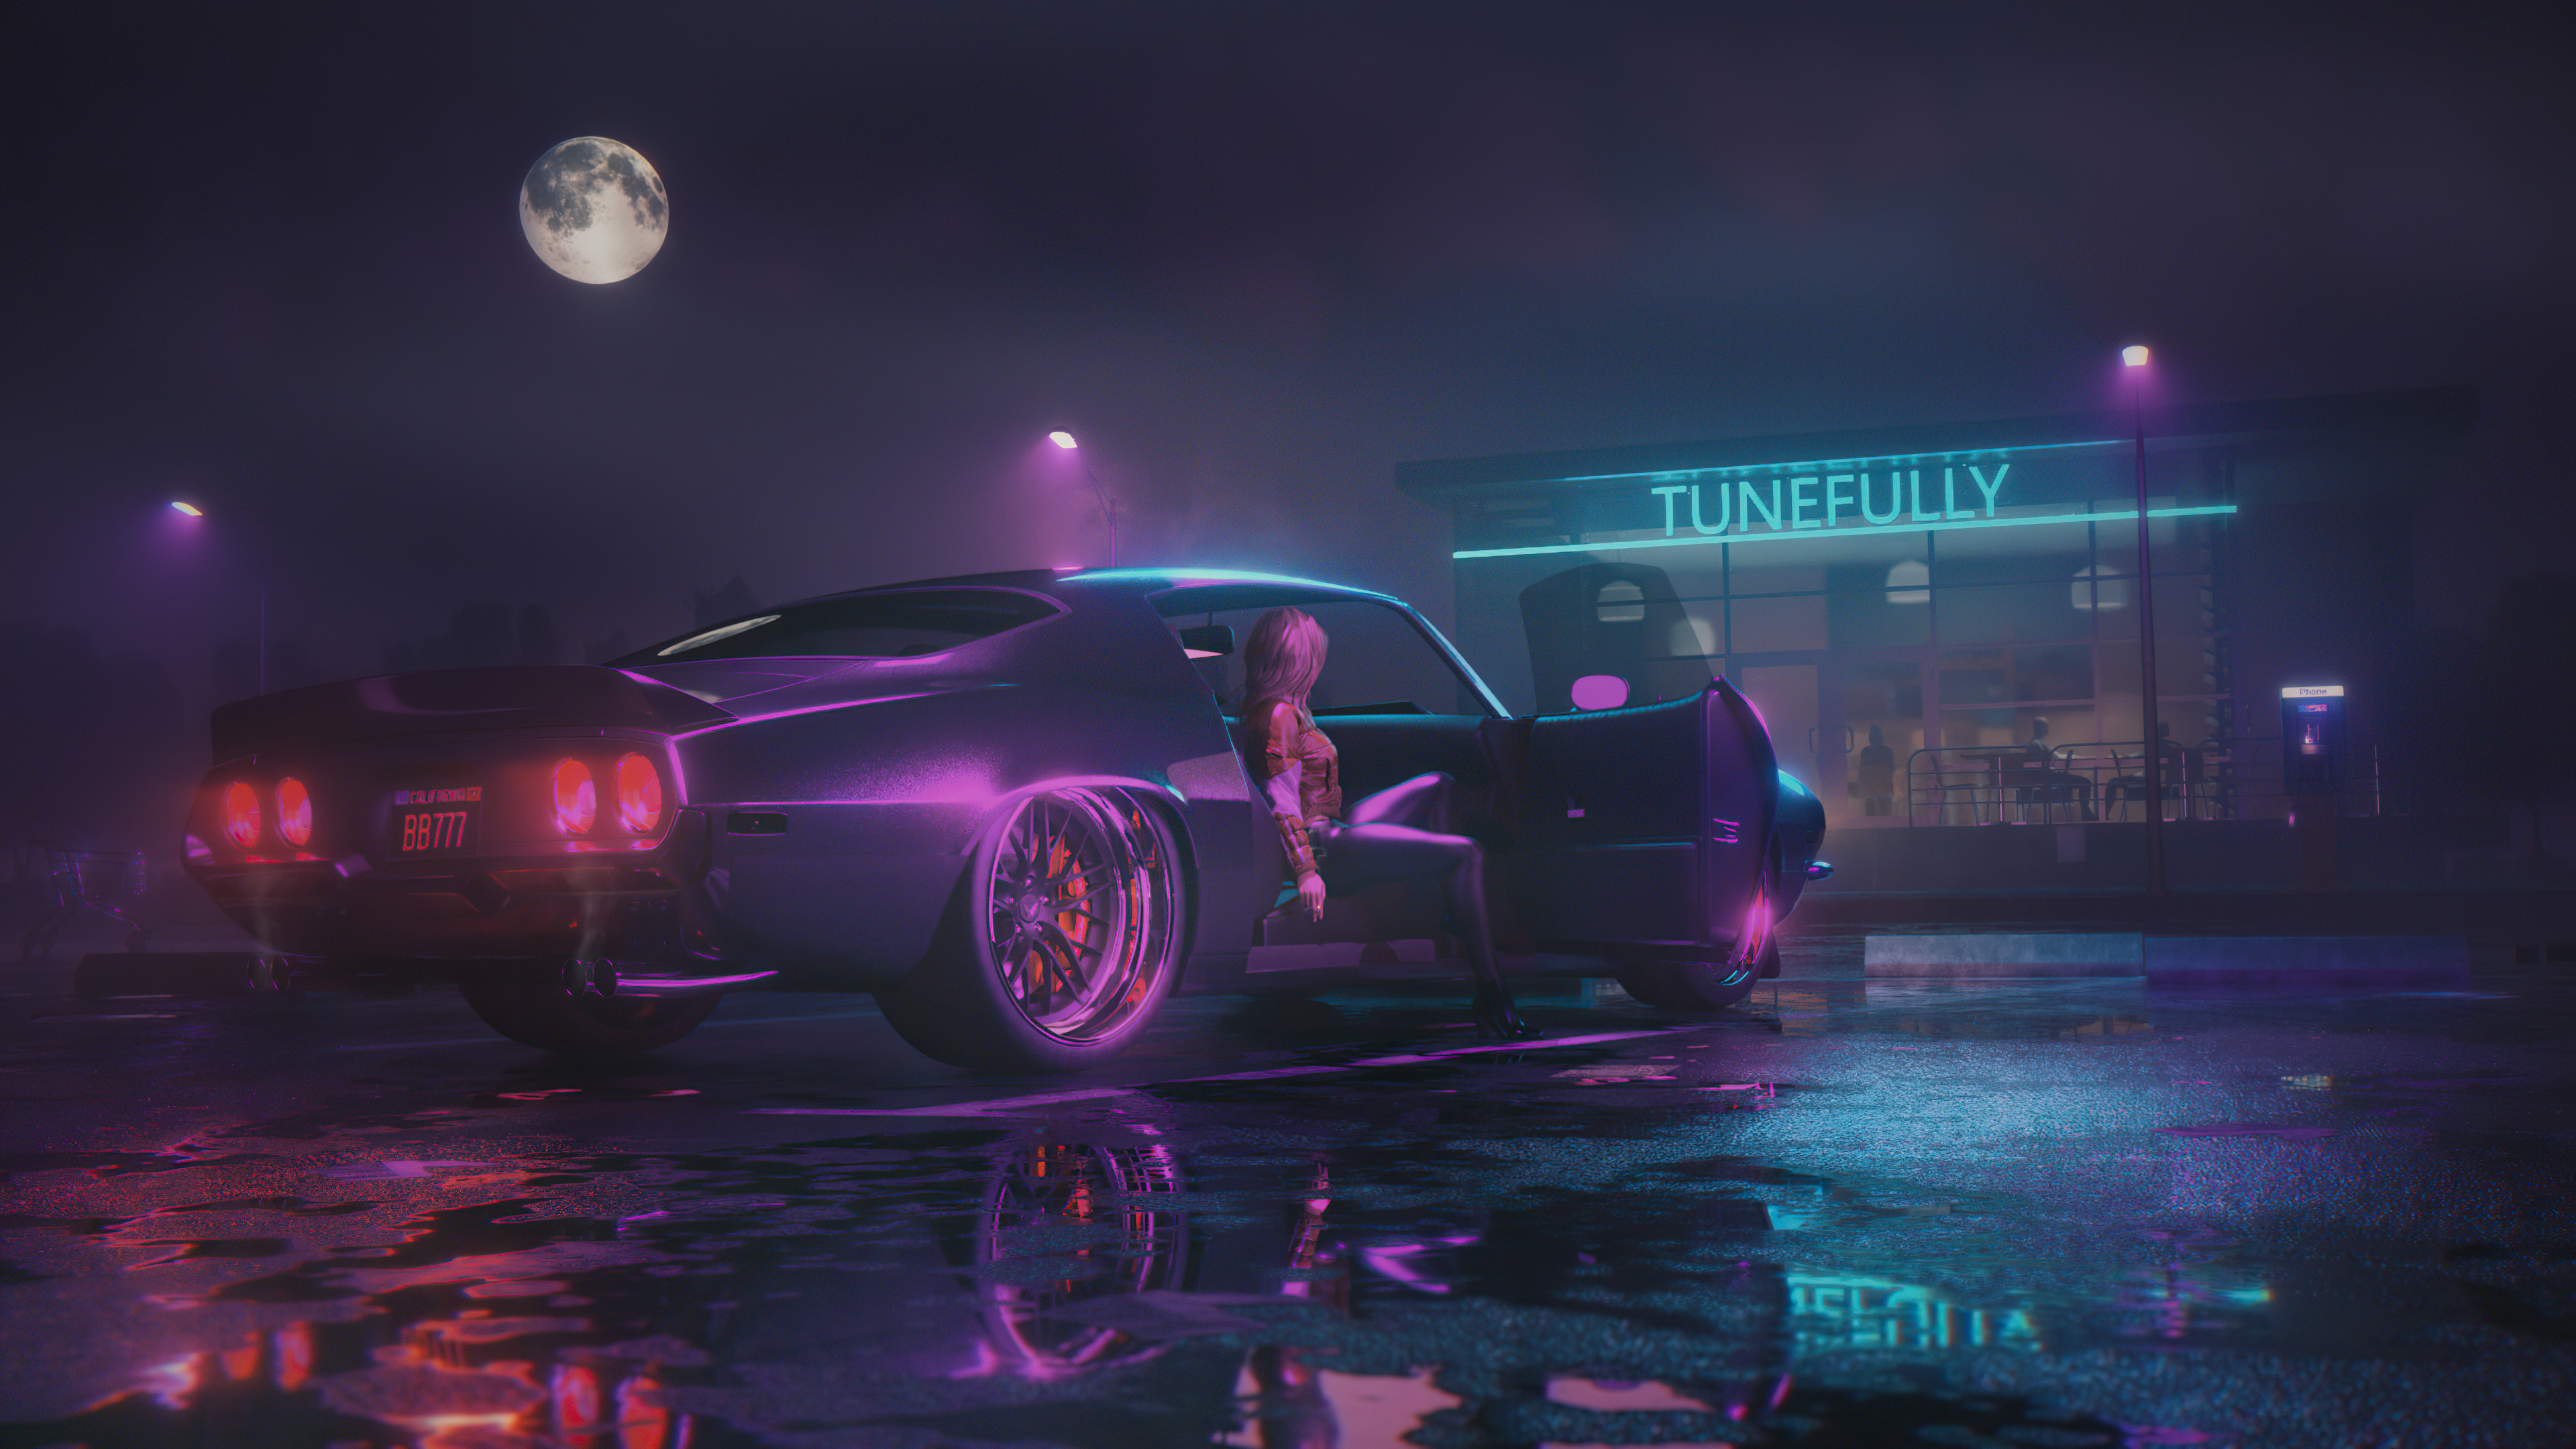 Night Call Wallpaper,HD Artist Wallpapers,4k Wallpapers,Images